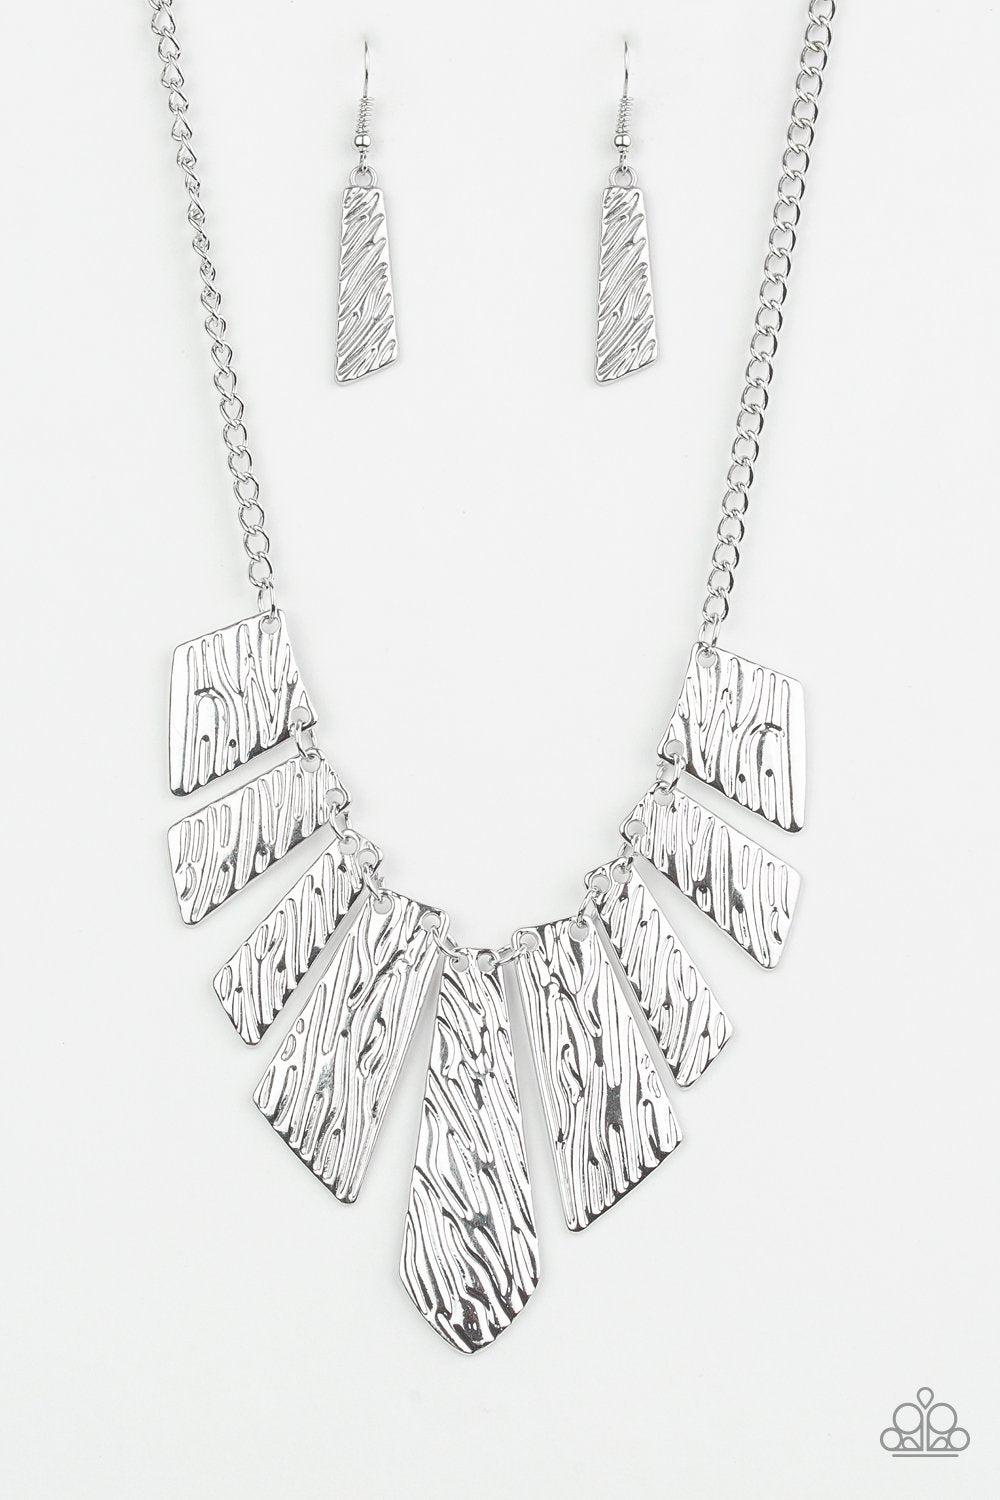 Texture Tigress Silver Necklace and matching Earrings - Paparazzi Accessories-CarasShop.com - $5 Jewelry by Cara Jewels